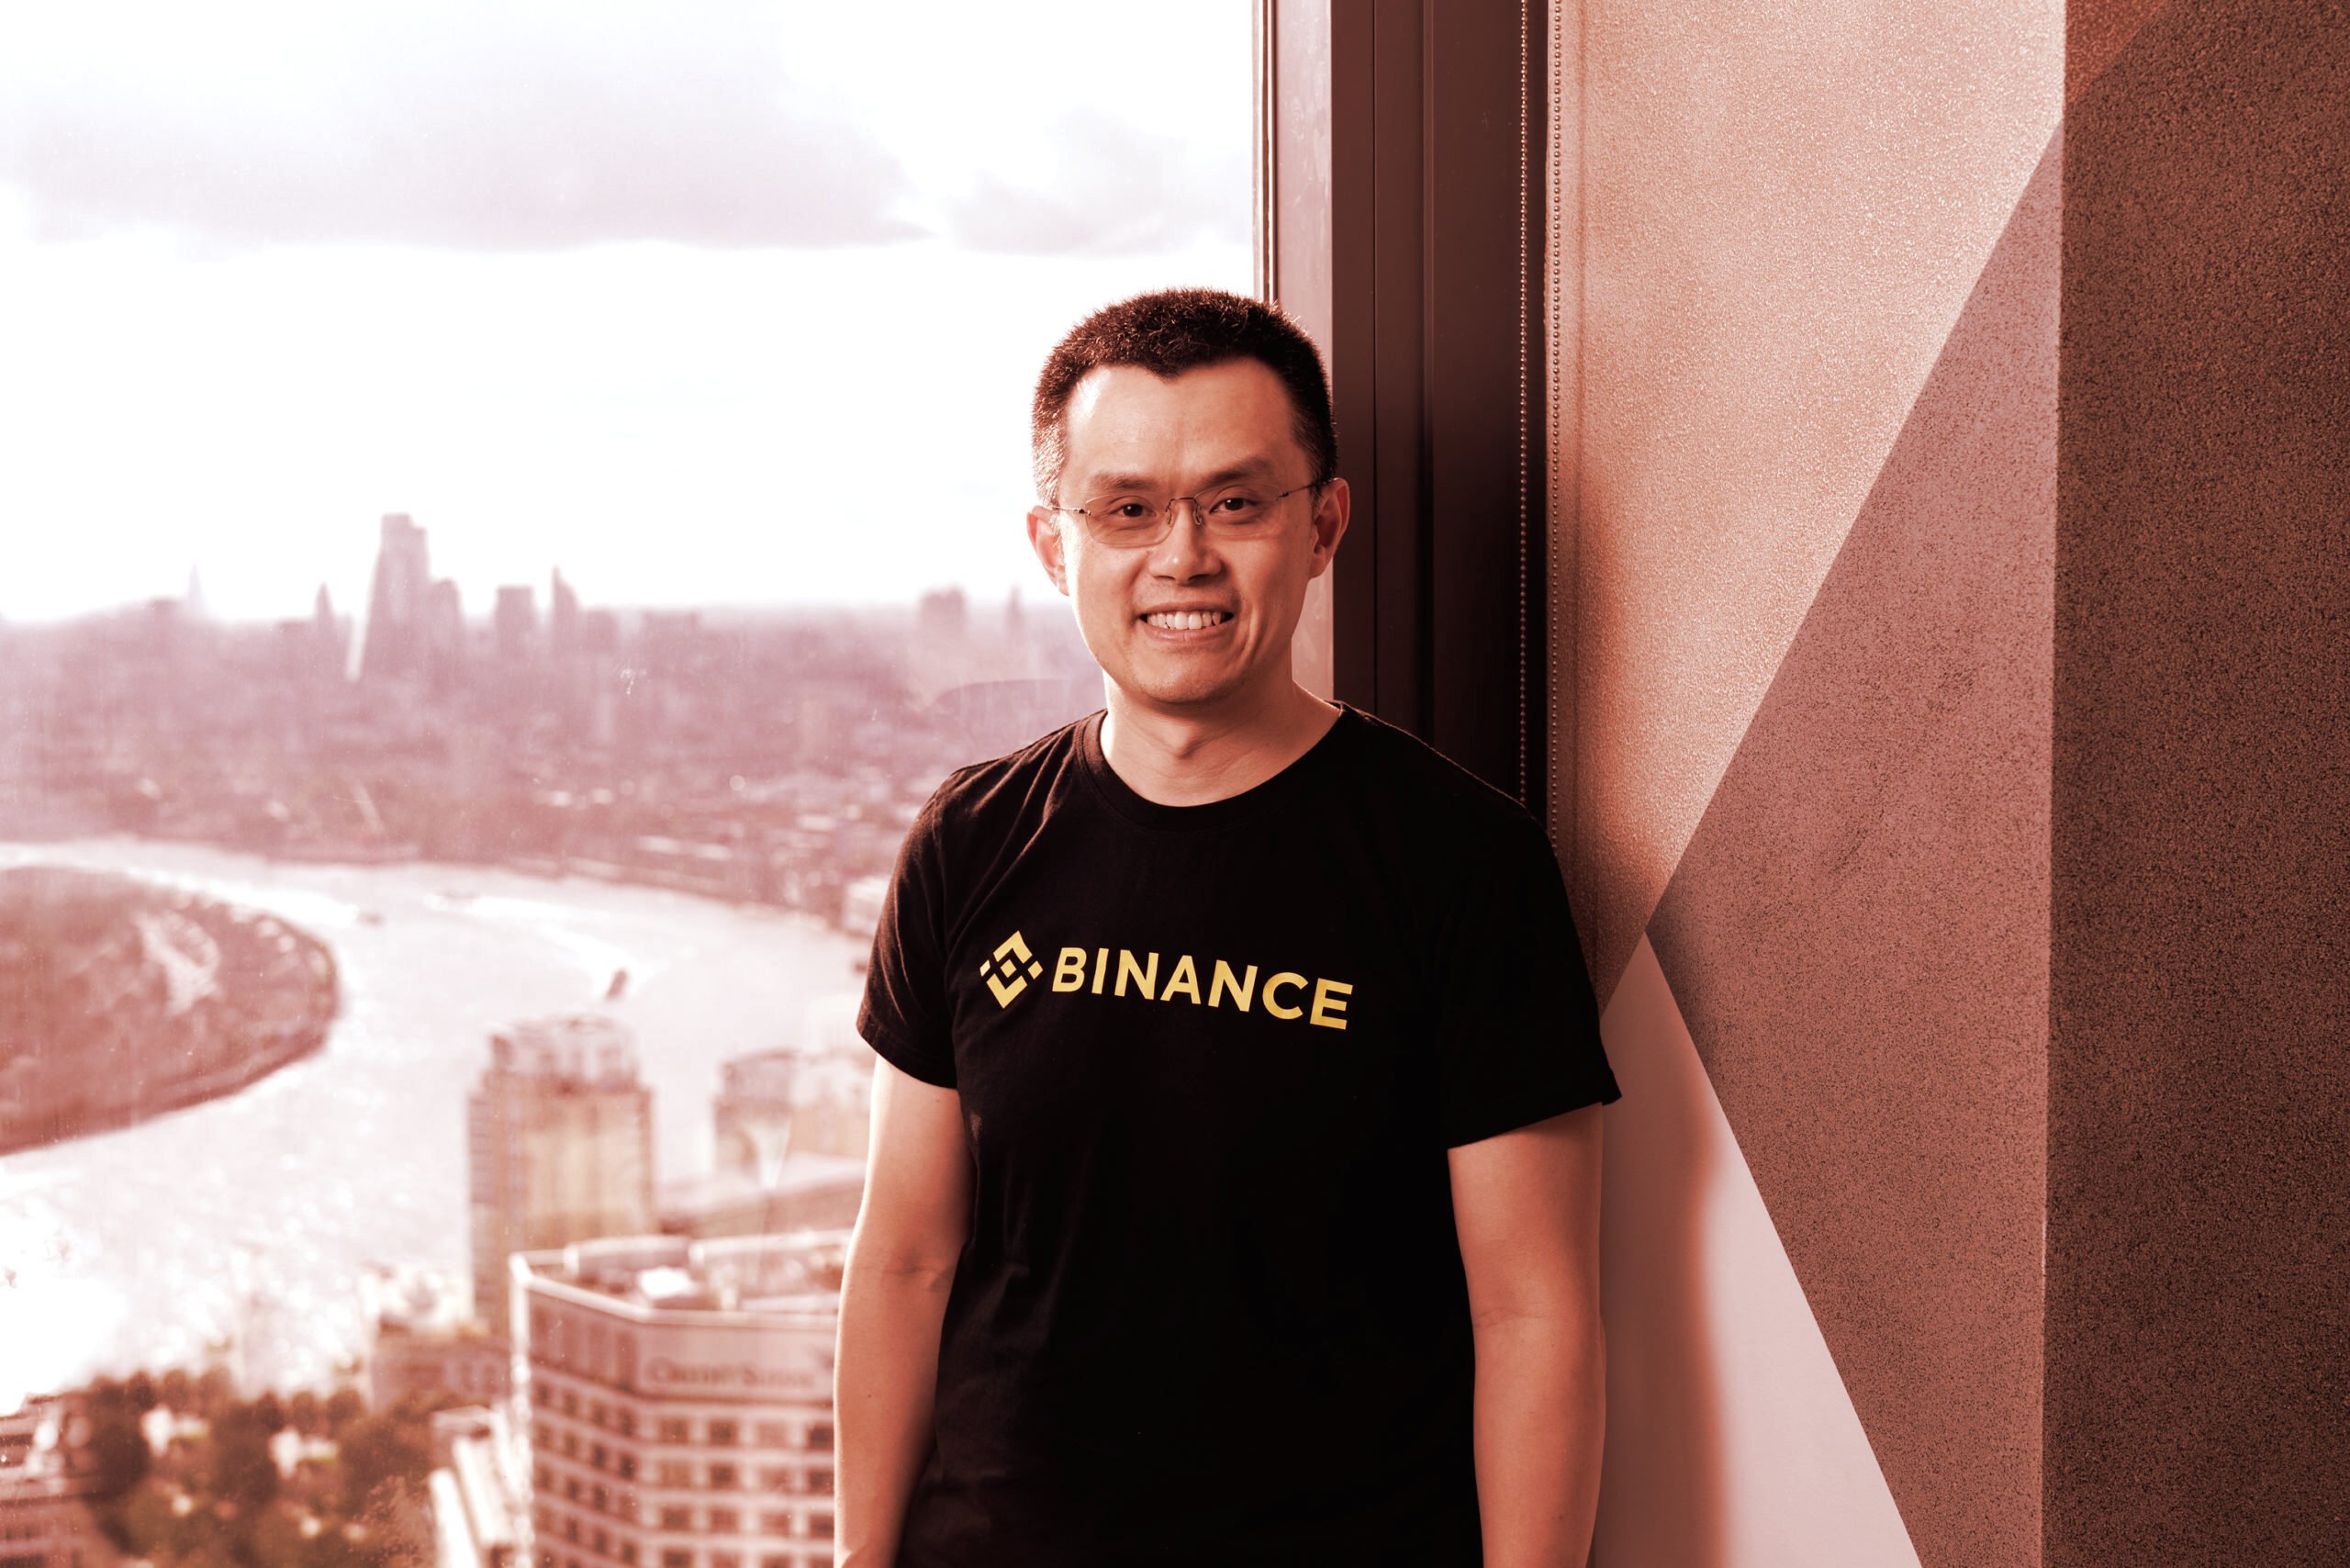 Crypto Winter Layoffs? Binance Is Hiring While Most Exchanges Are Firing, CEO Says